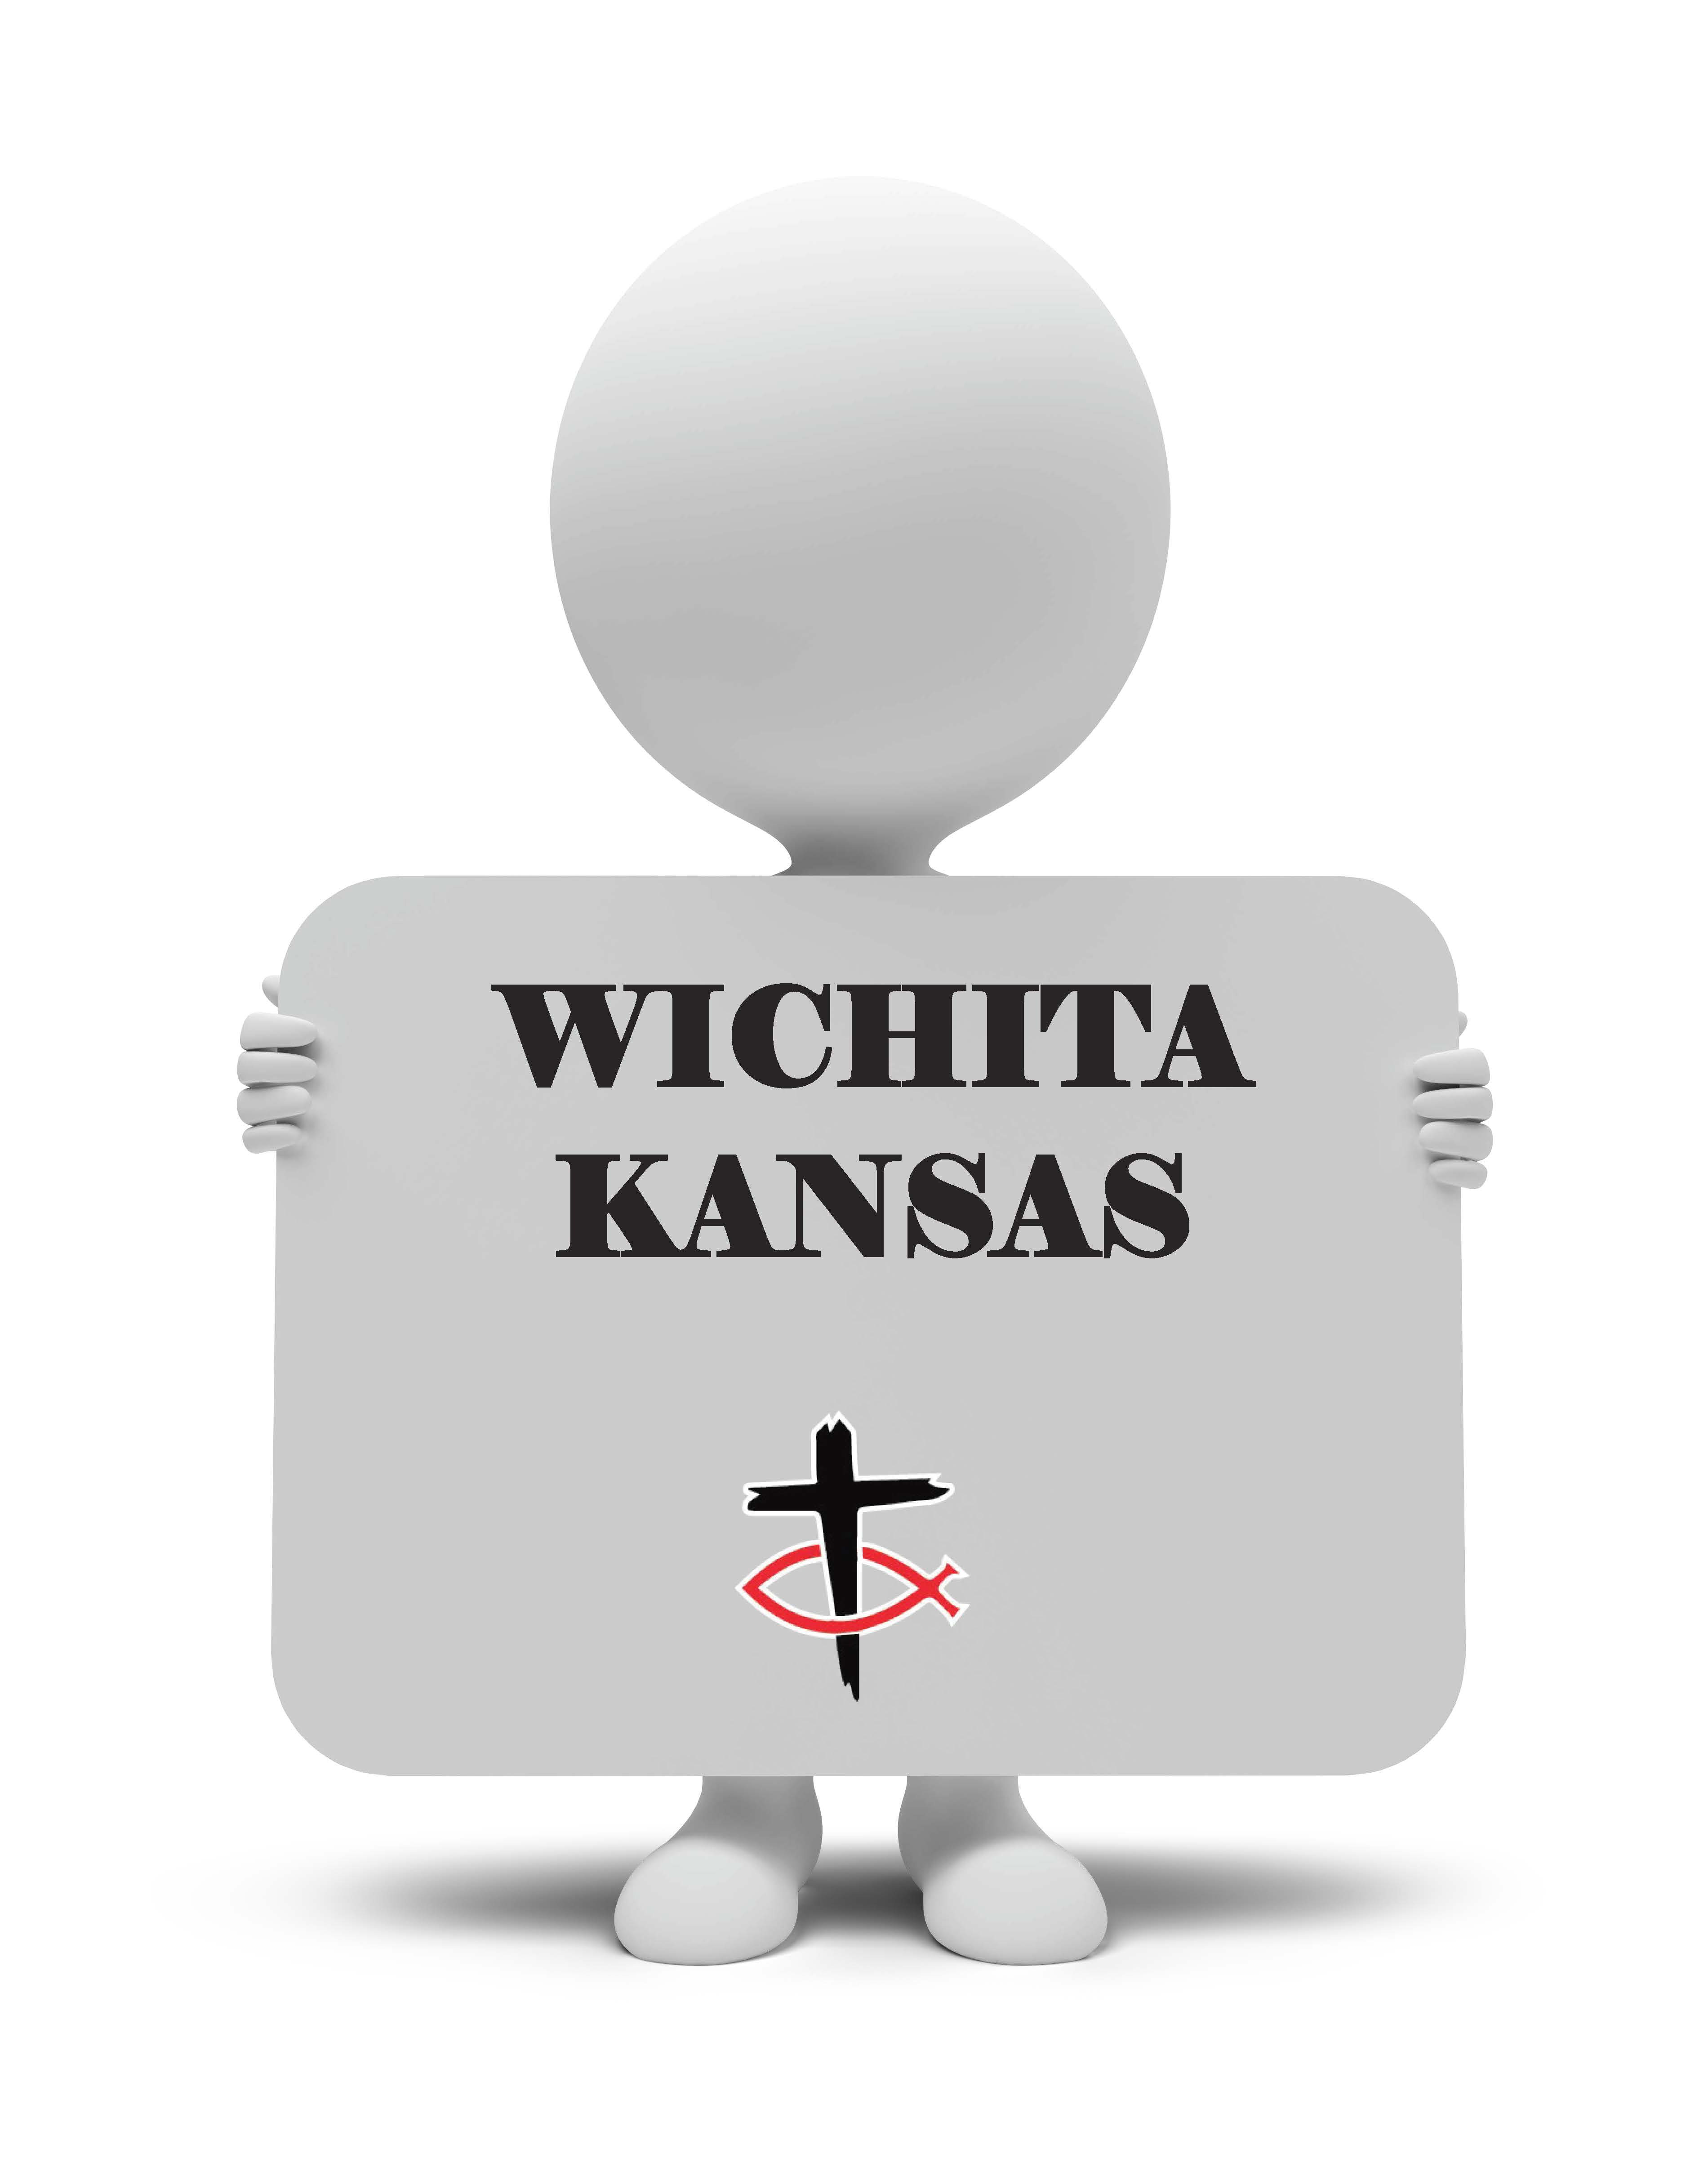 pick up the christian business print guide in wichita kansas